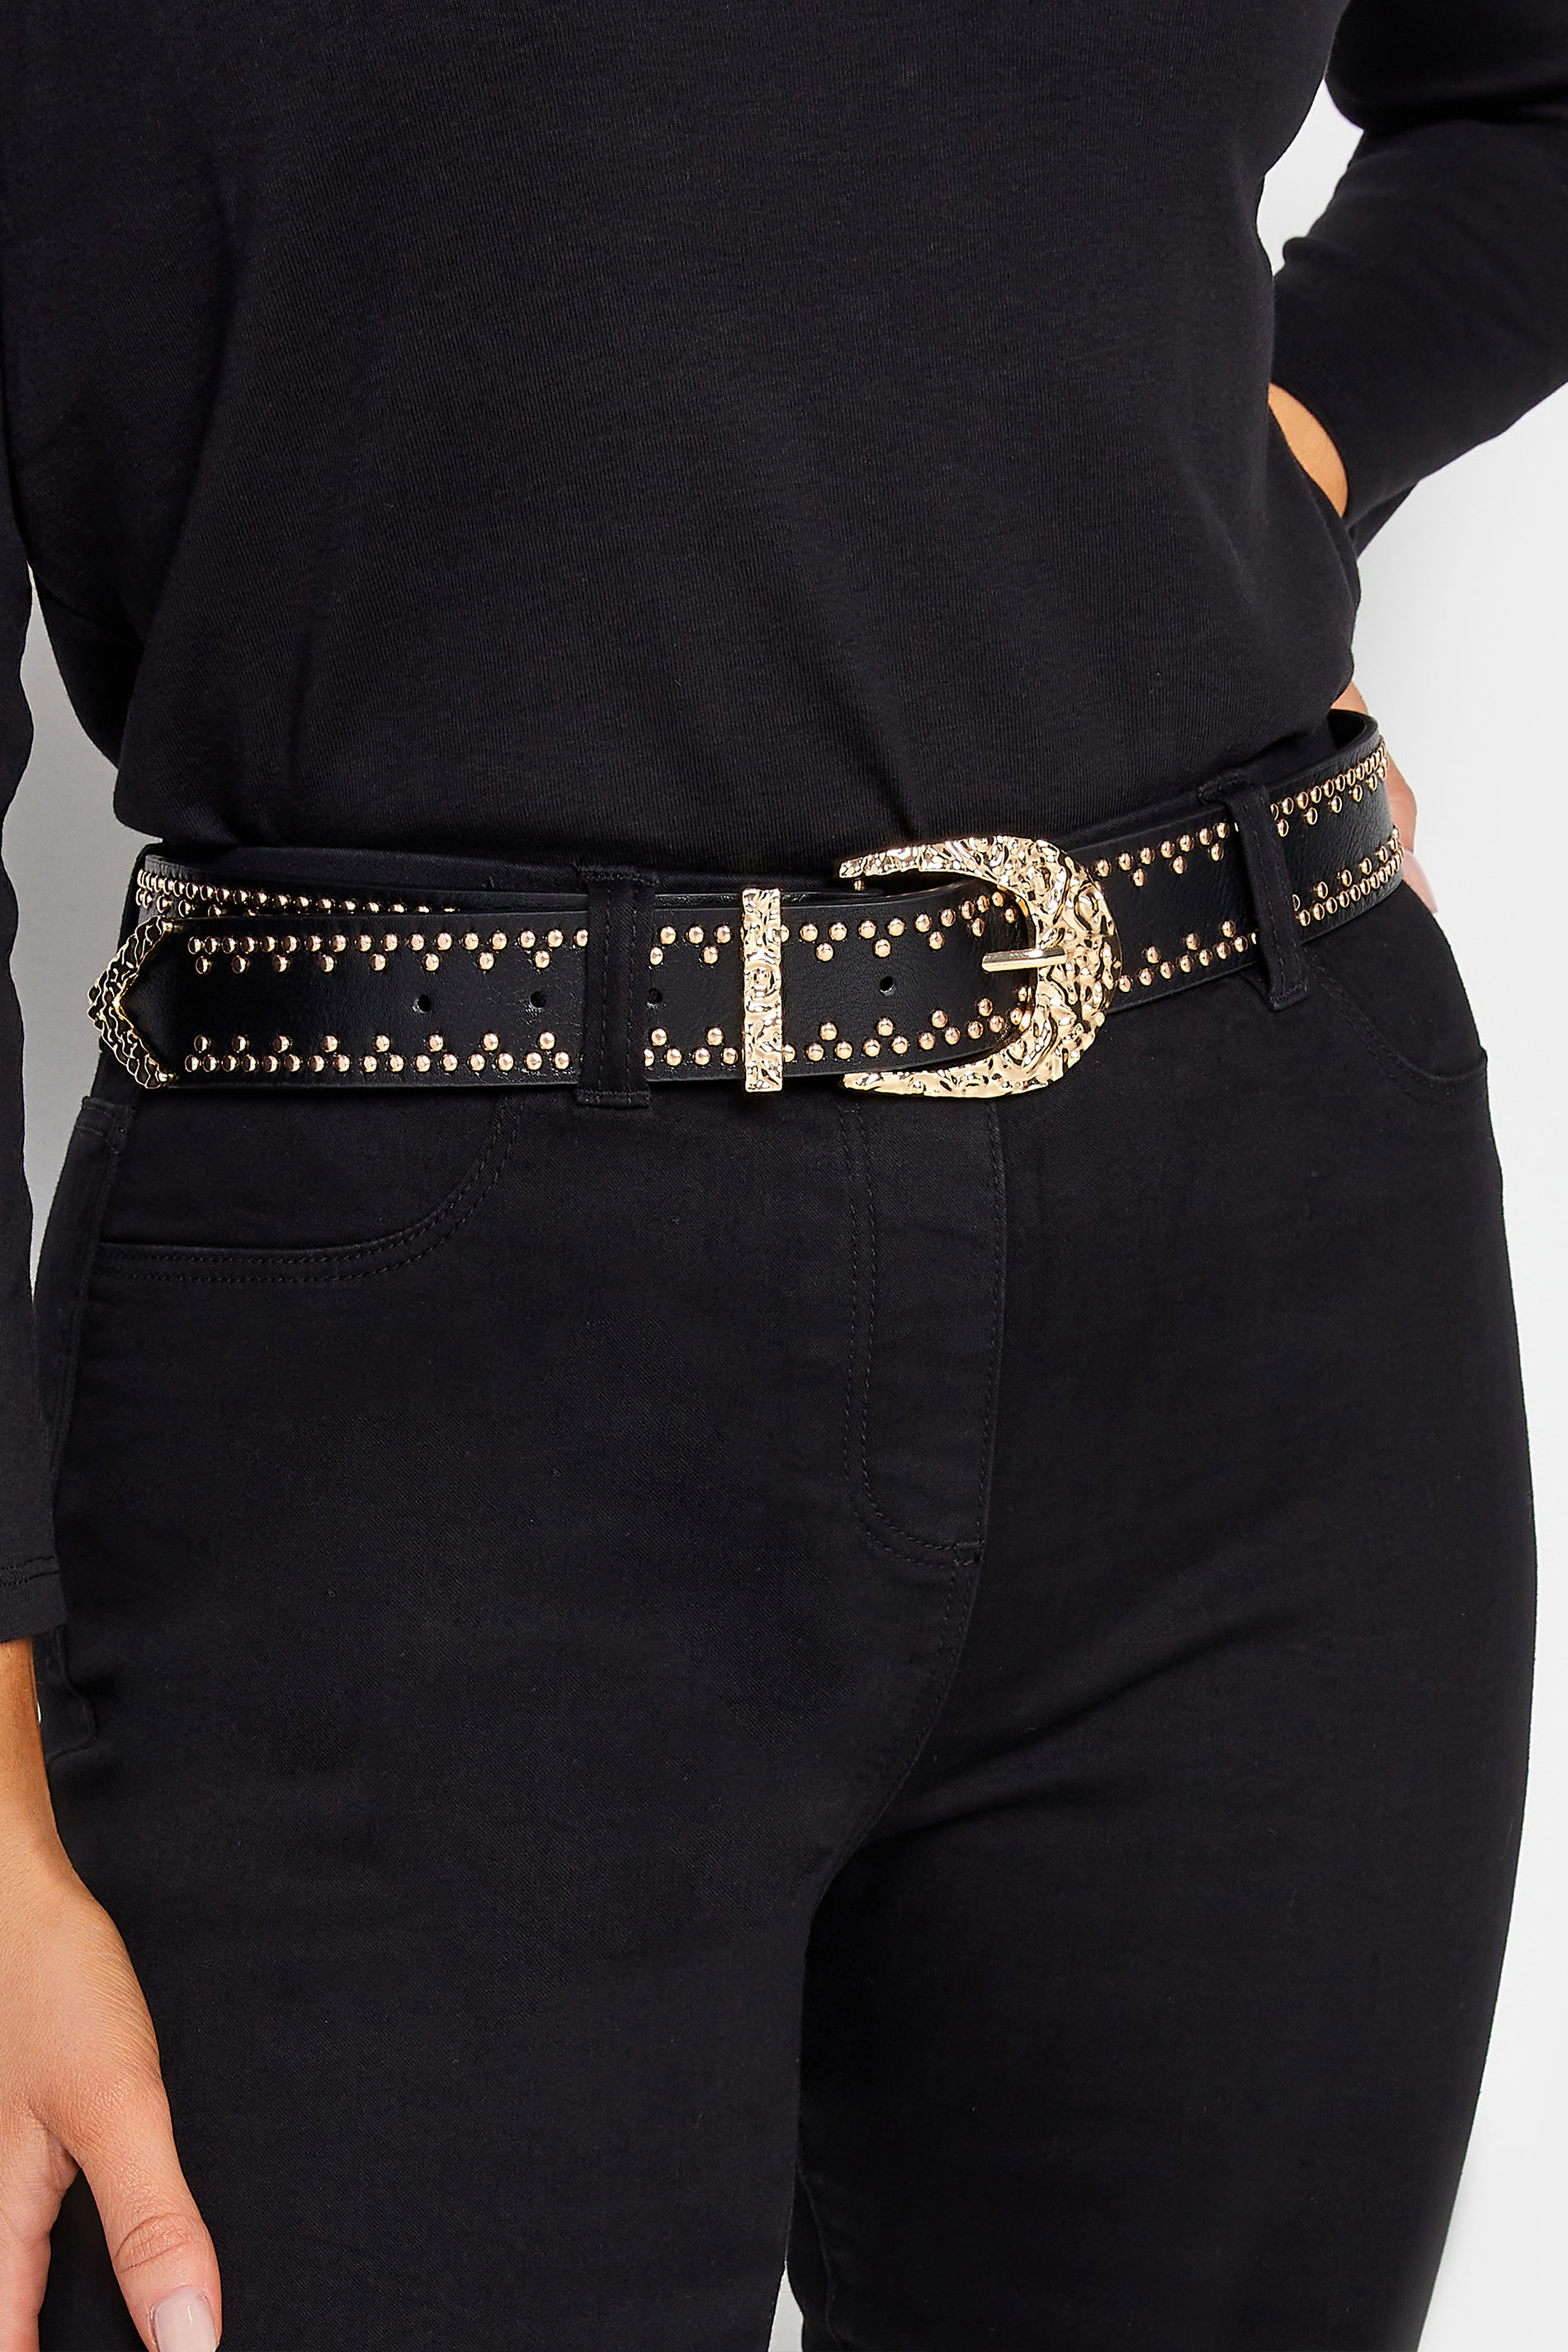 Black Studded Textured Buckle Belt | Yours Clothing 1